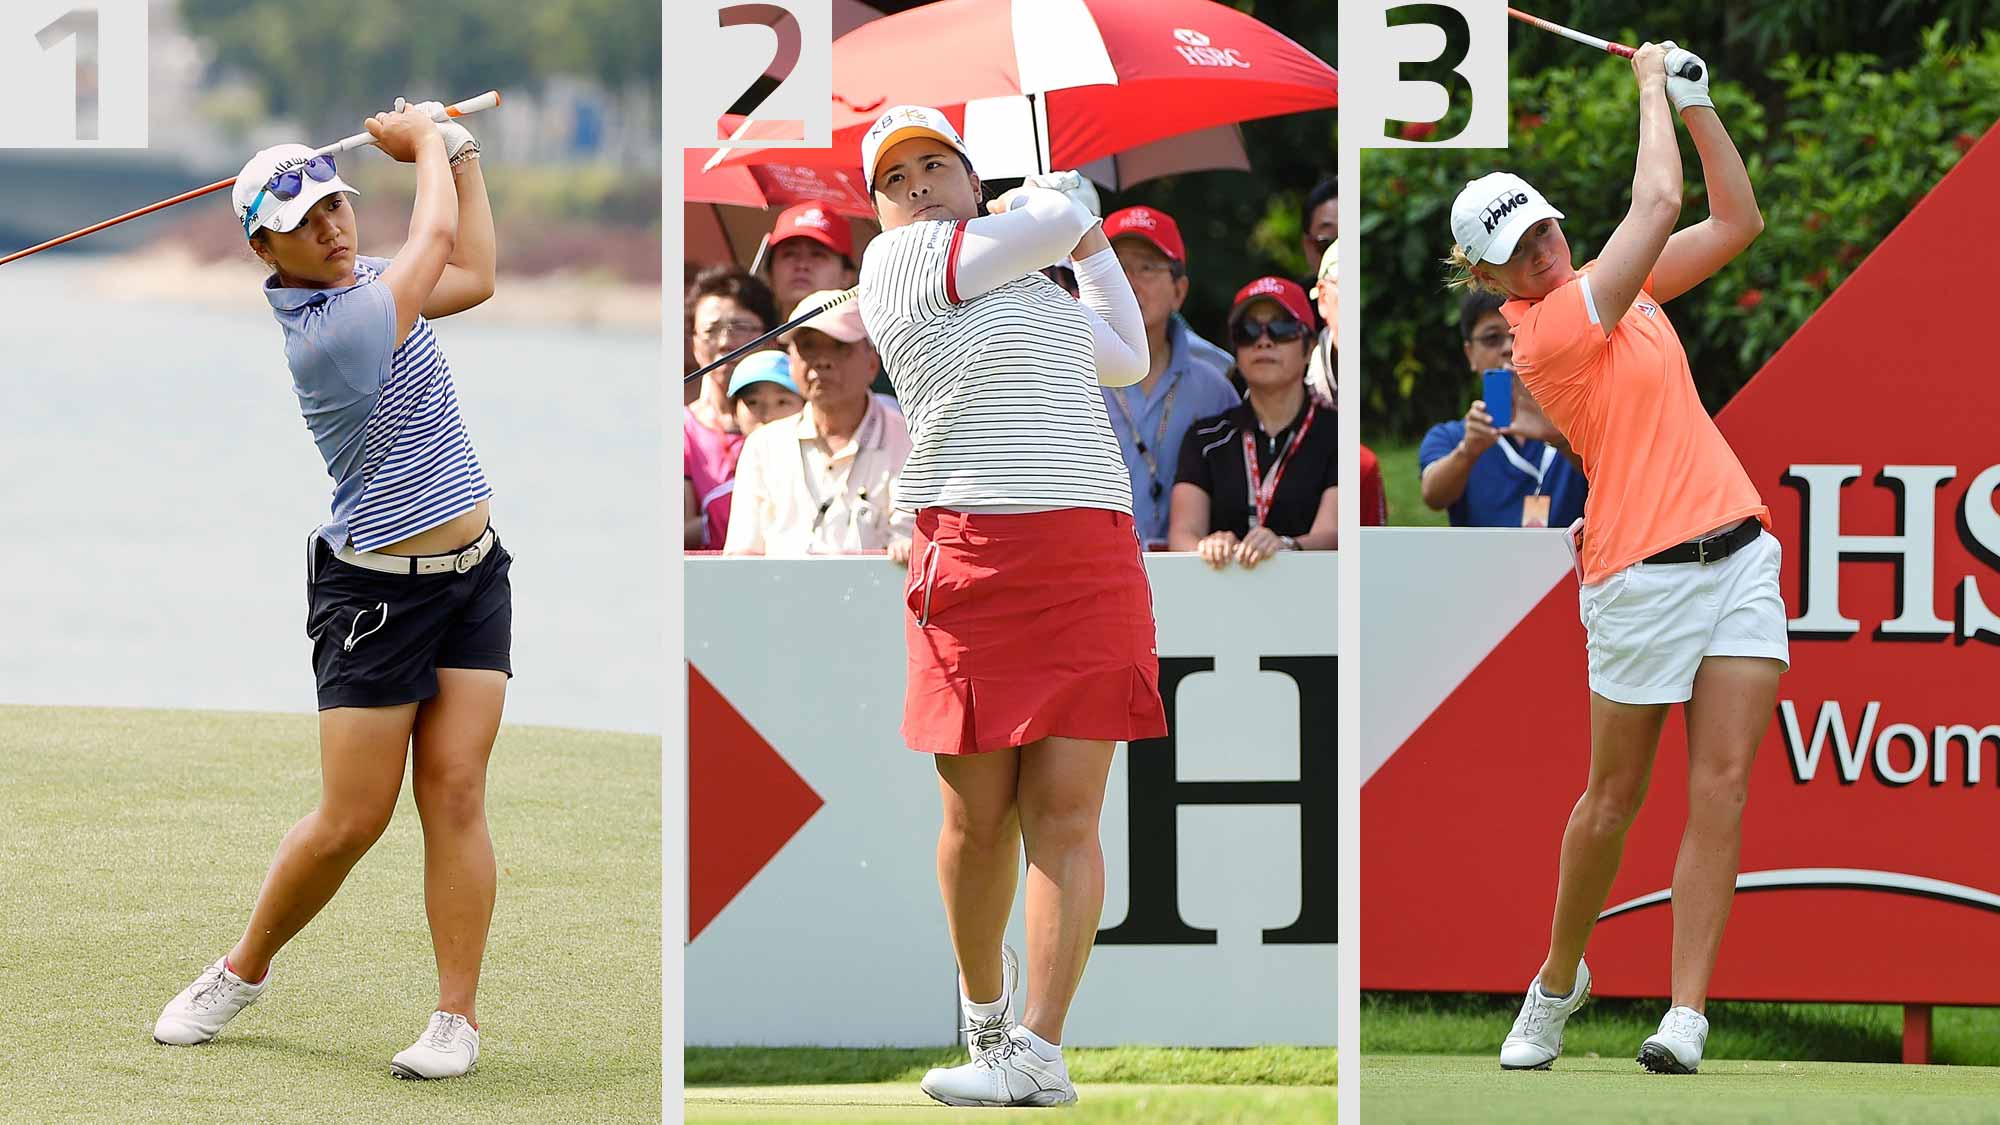 The Group to Watch in the Final Round of the HSBC Women's Champions